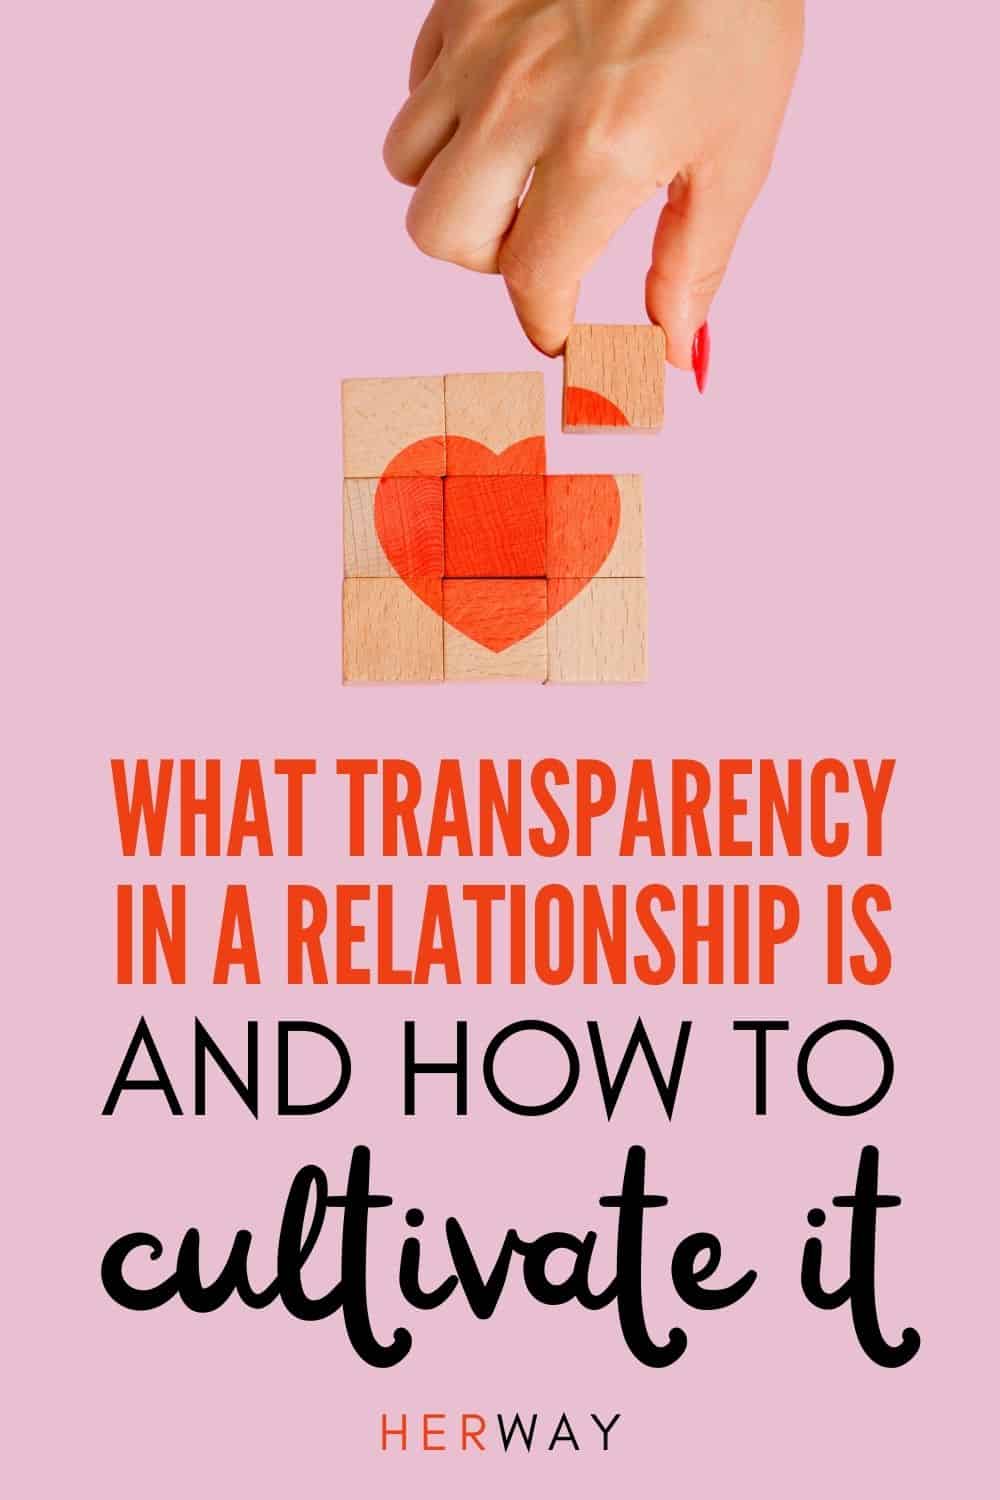 5 Benefits Of Transparency In A Relationship (+ 7 Ways To Show It) Pinterest